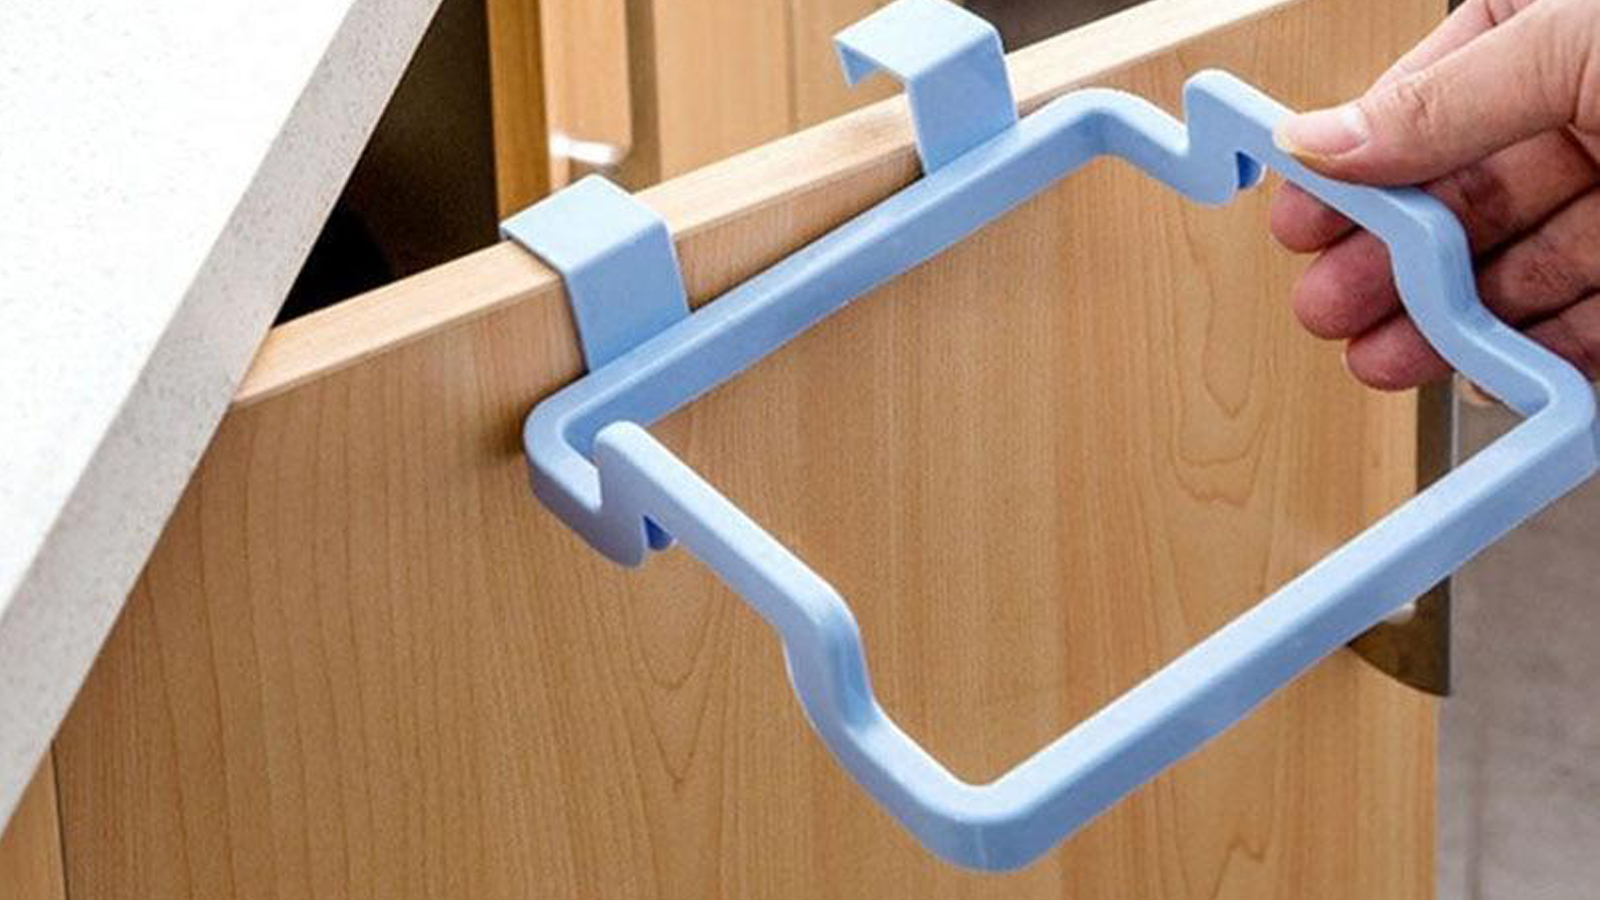 Manufactuers of Handle Hangers From Tirupur, Karur and Coimbatore Cities